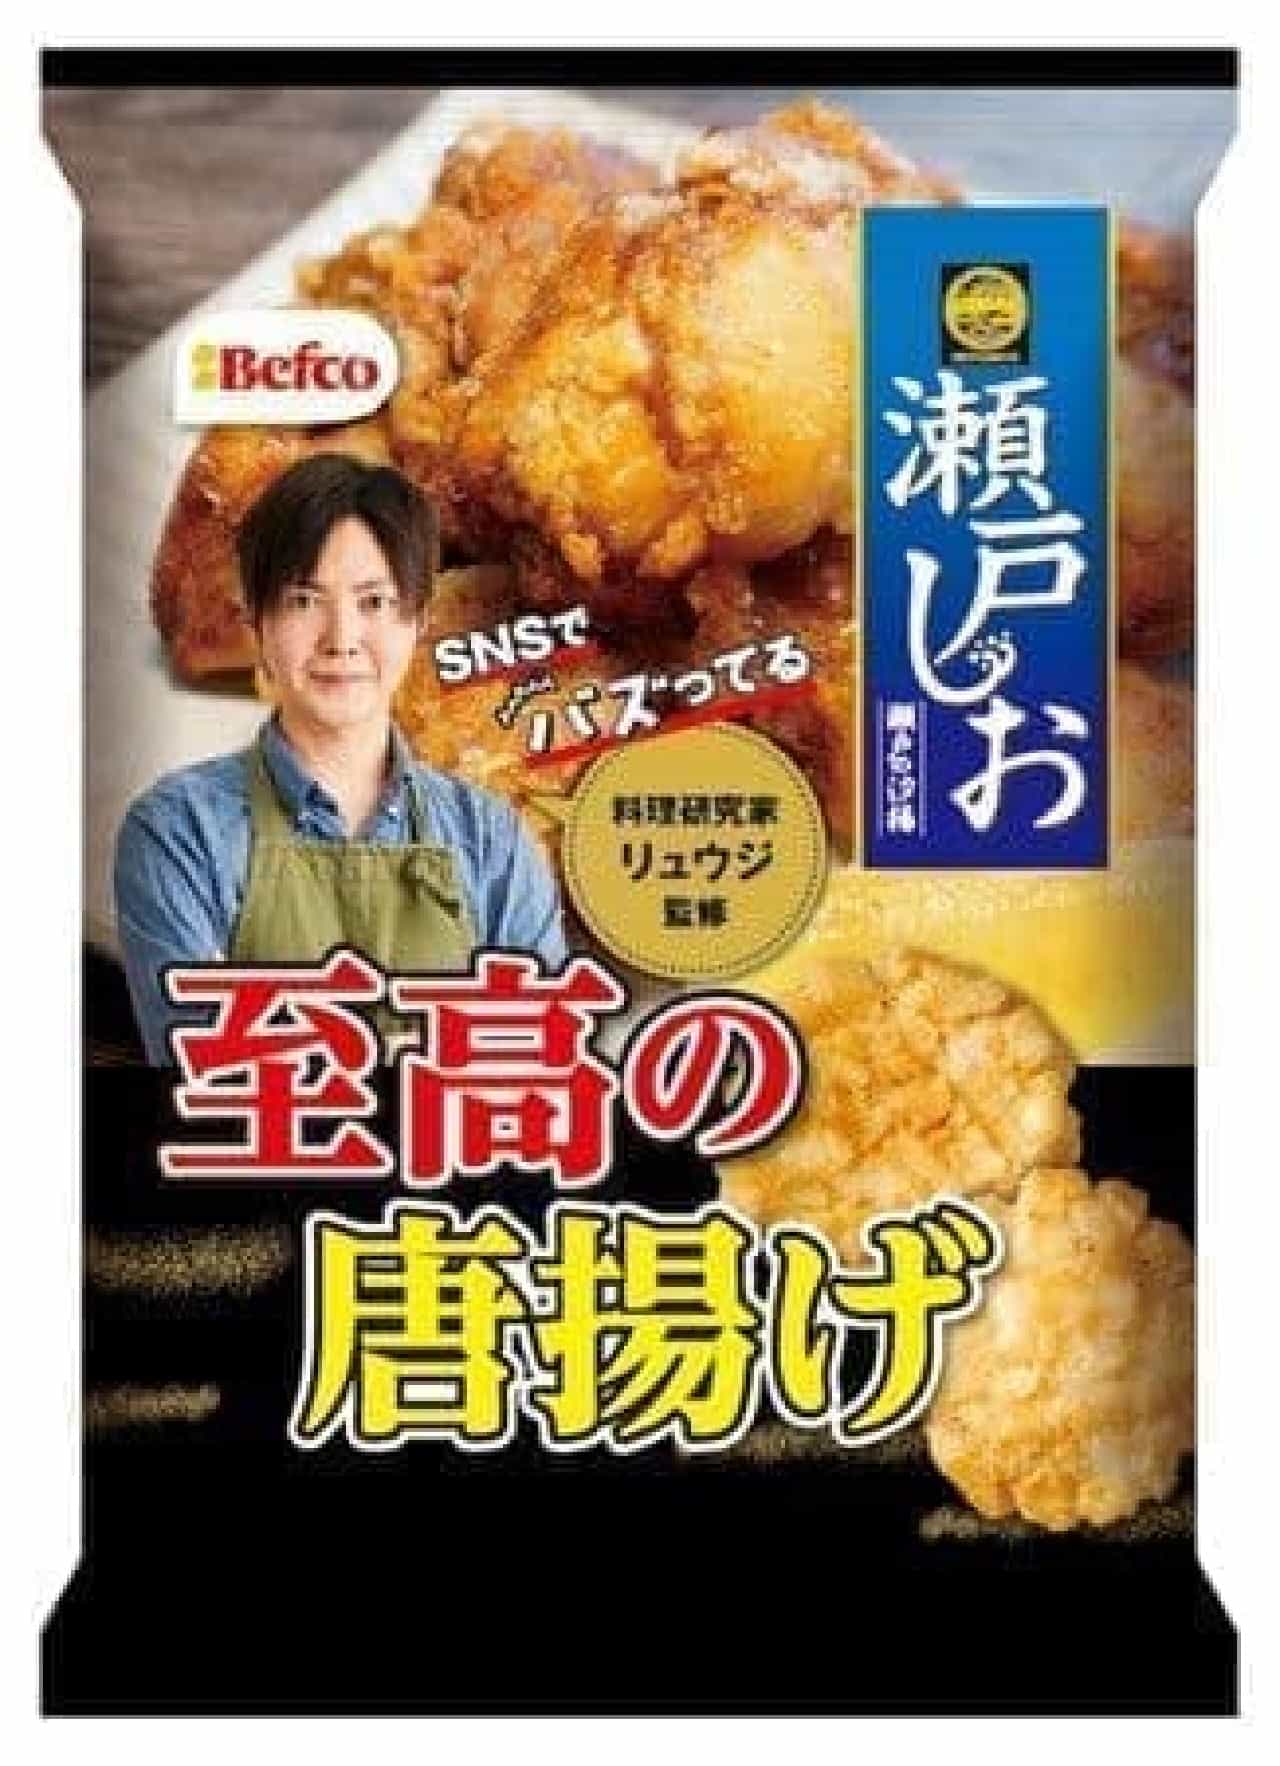 Supervised by cooking researcher Ryuji "Seto Shio Supreme Fried Chicken"